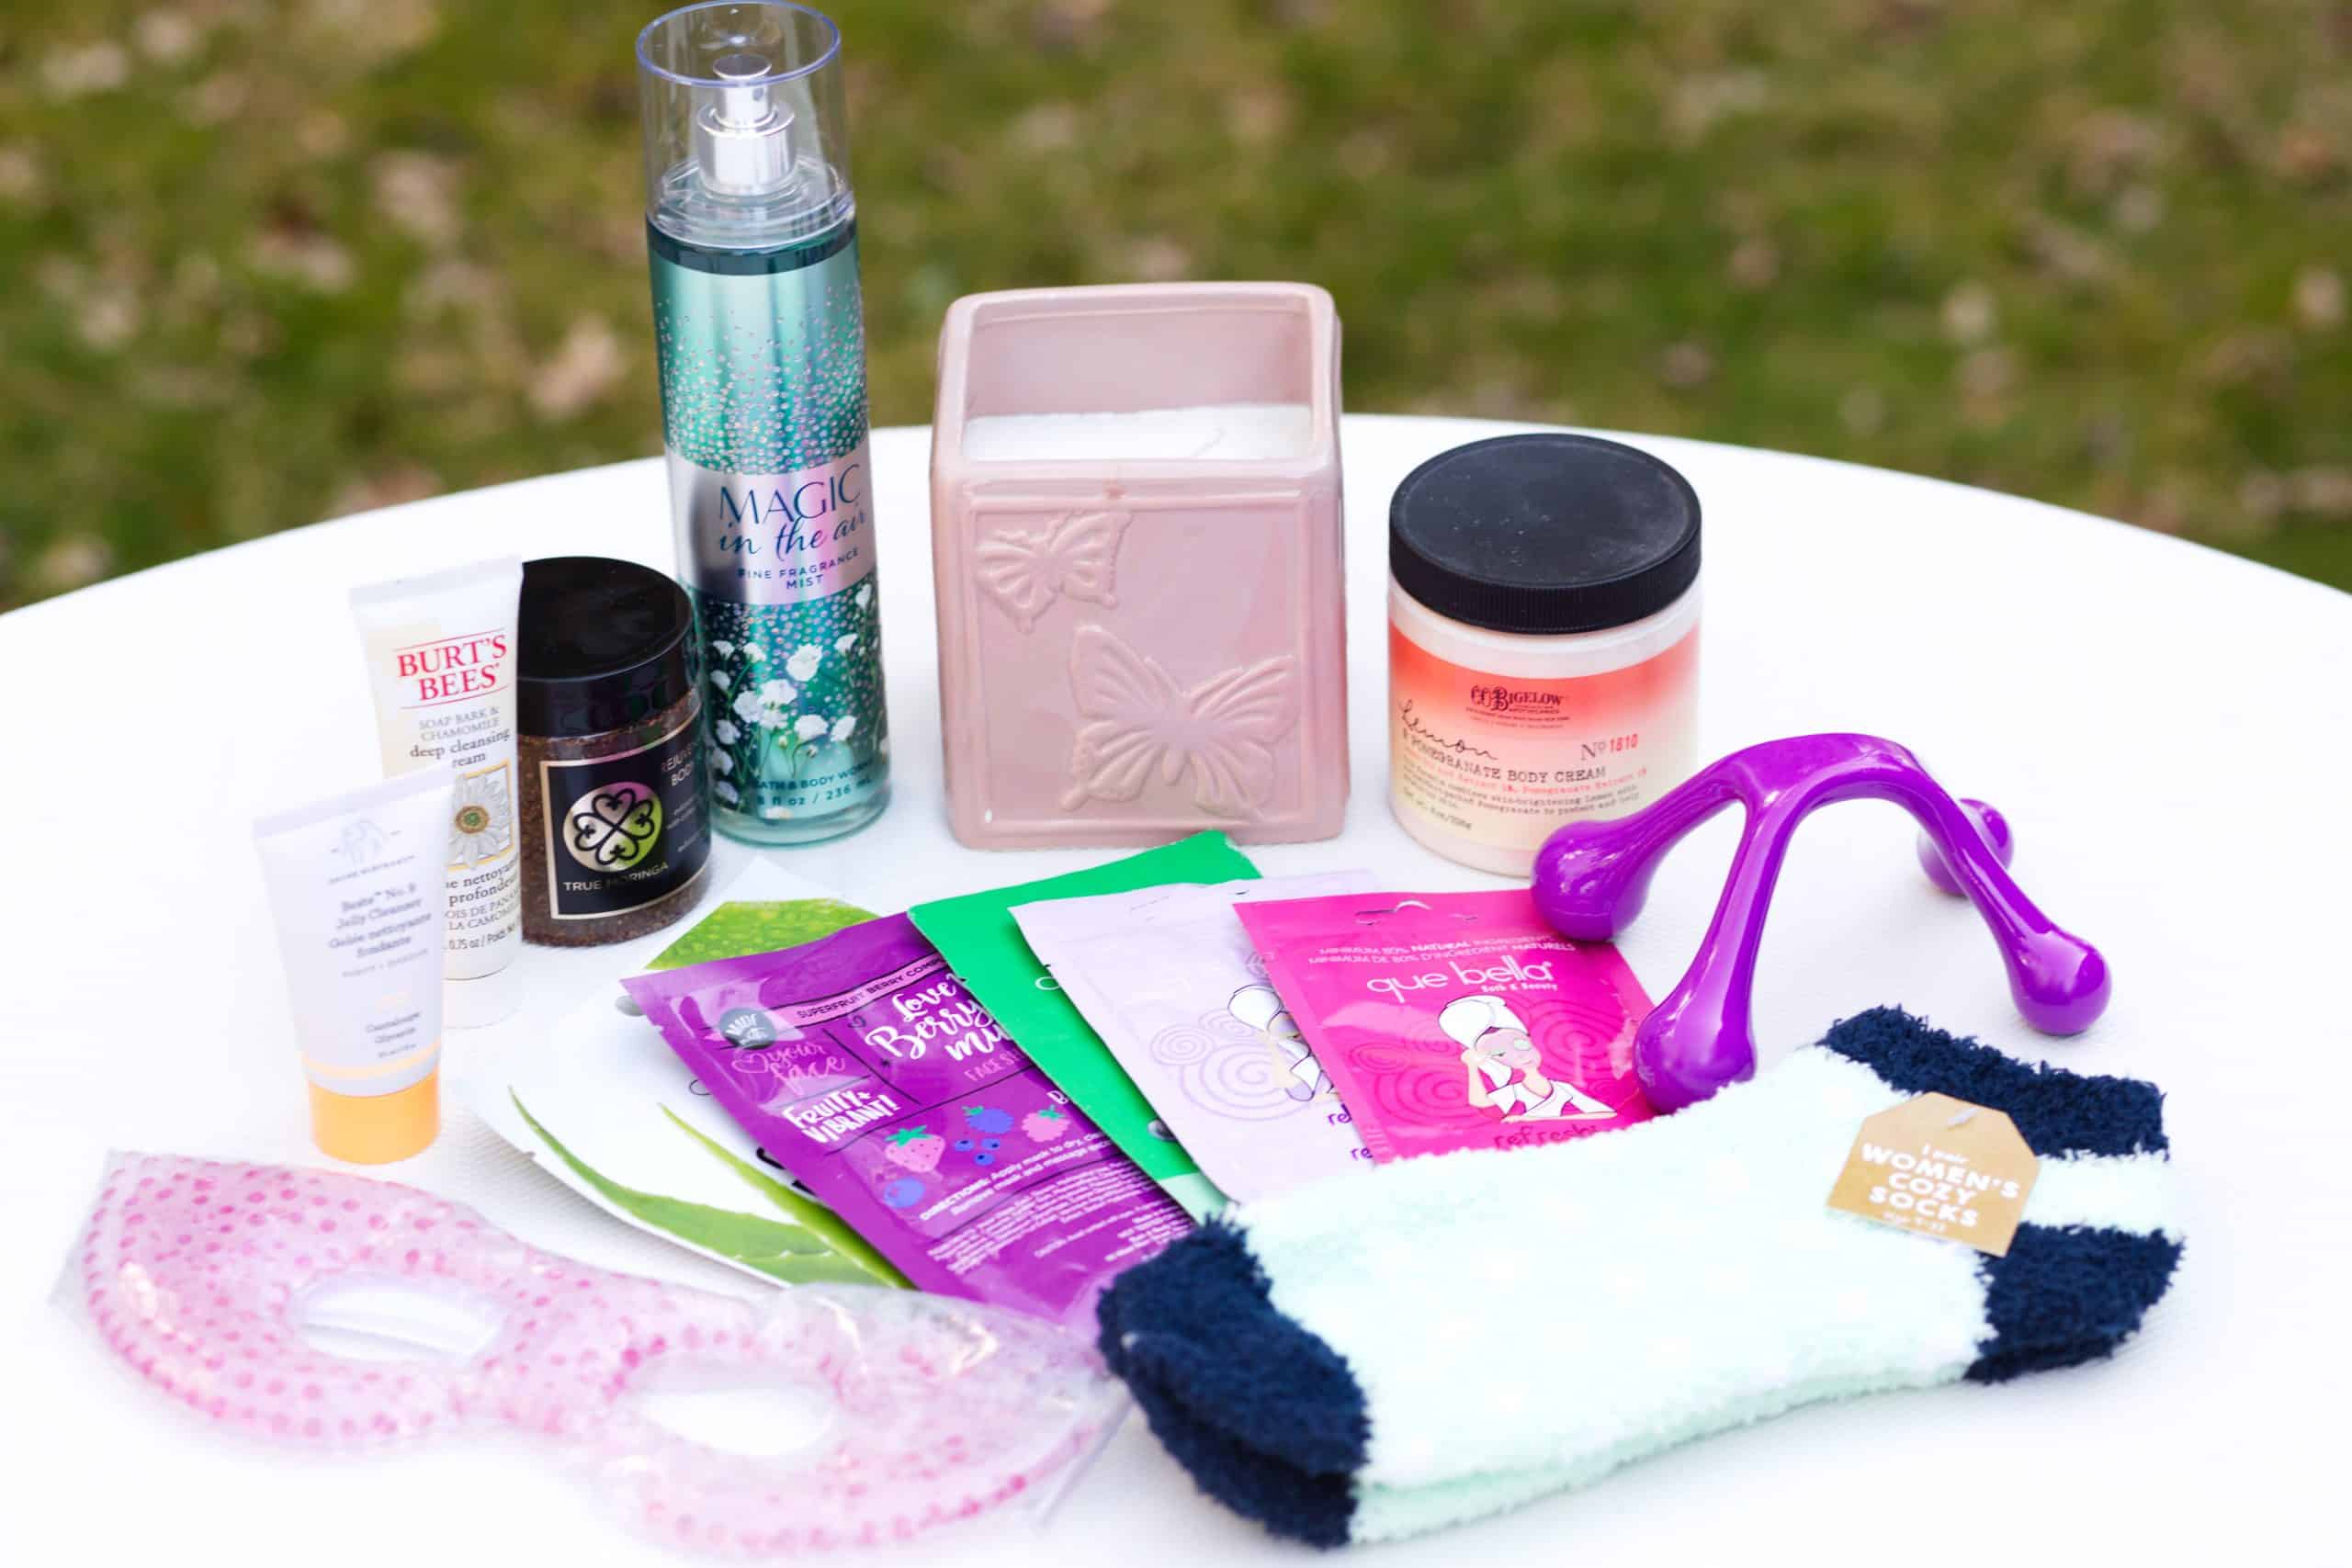 Homemade spa day gift basket - Several spa gifts arranged on table - eye mask, socks, body scrub, candle, face mask